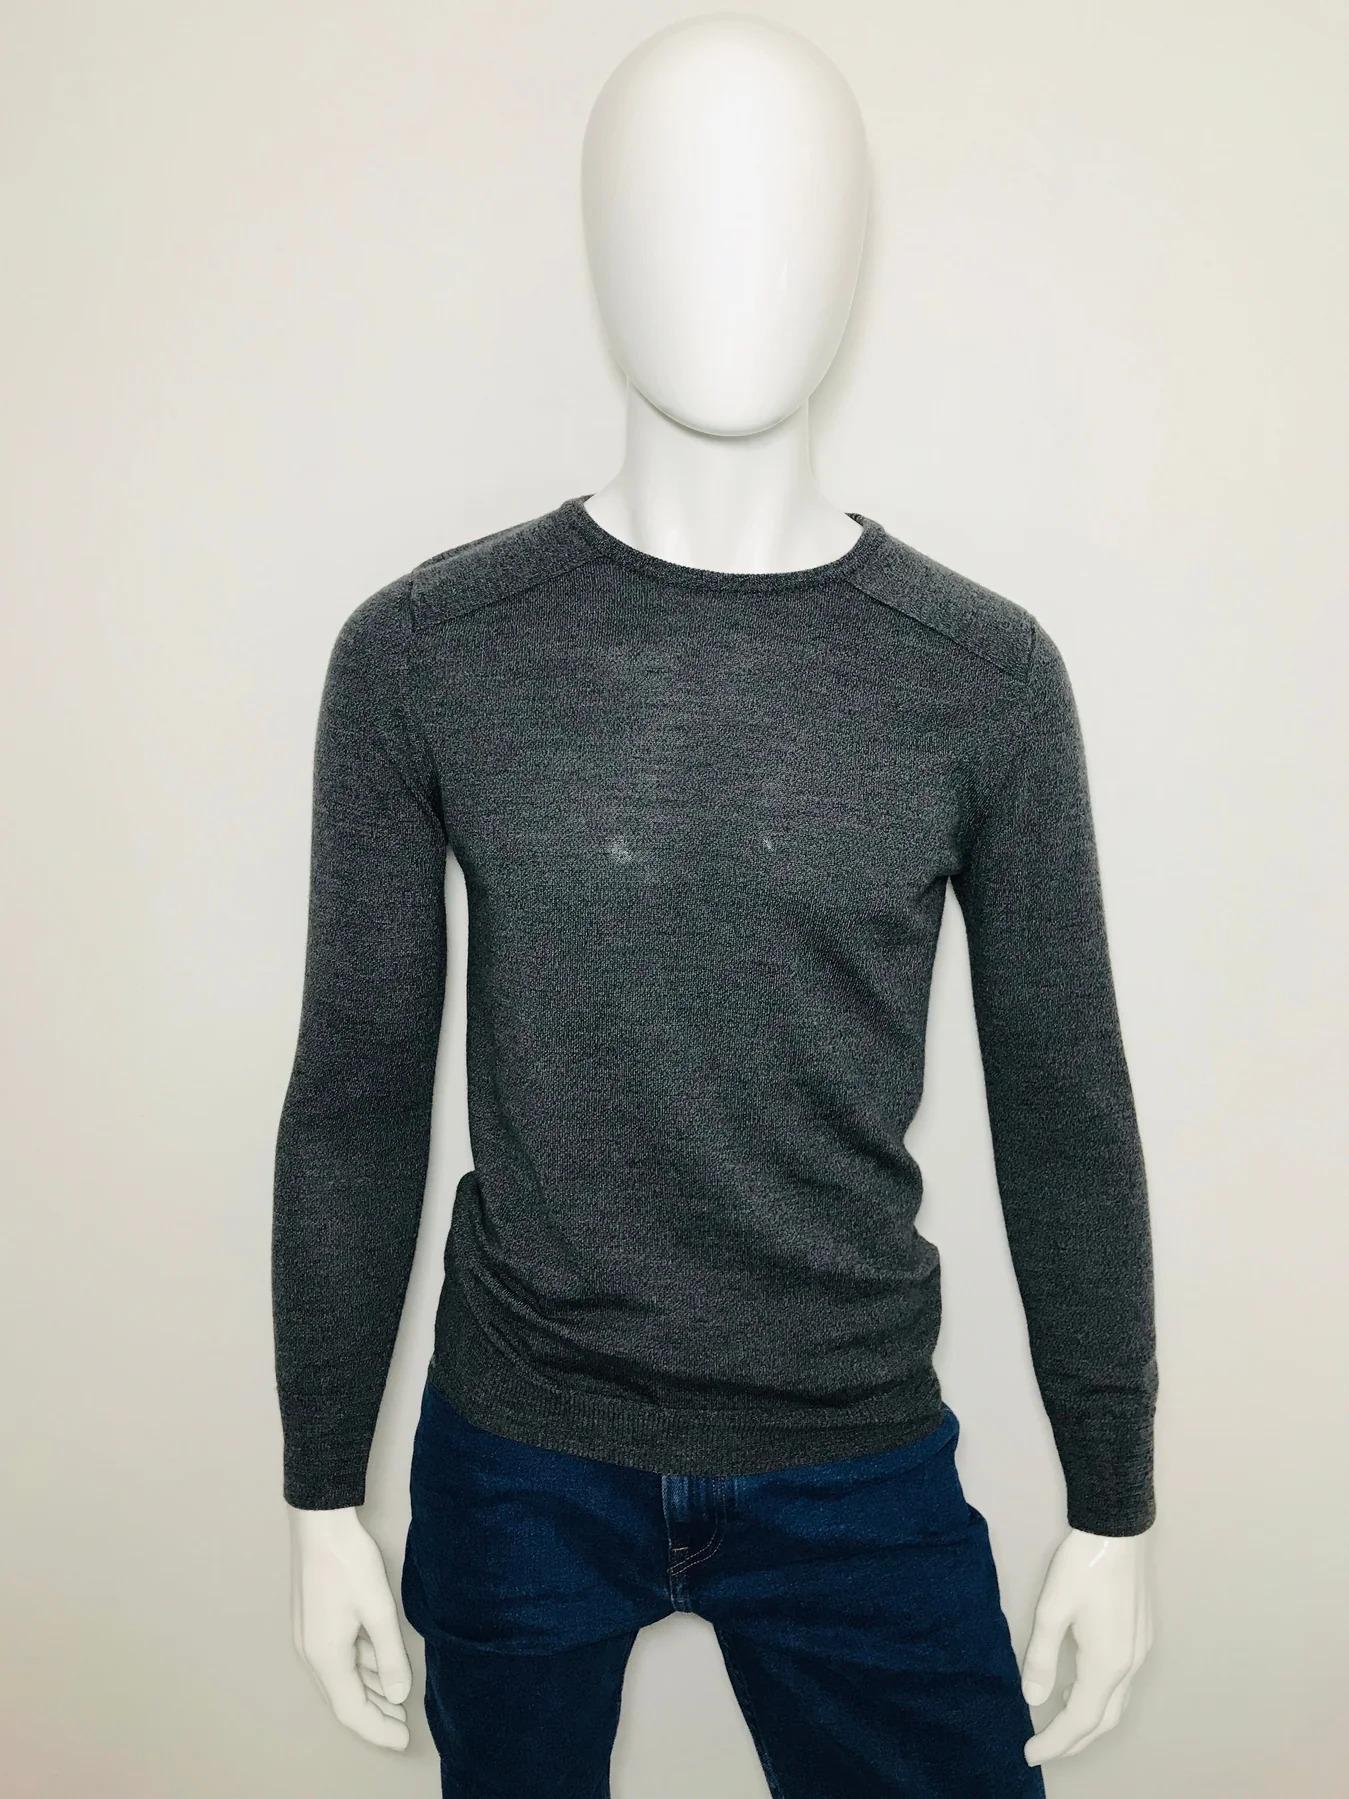 Oliver Spencer Sweater

Dark grey jumper with crew neckline, slim fit.

Additional information:
Size – S
Composition - Merino Wool 
Condition – Very Good